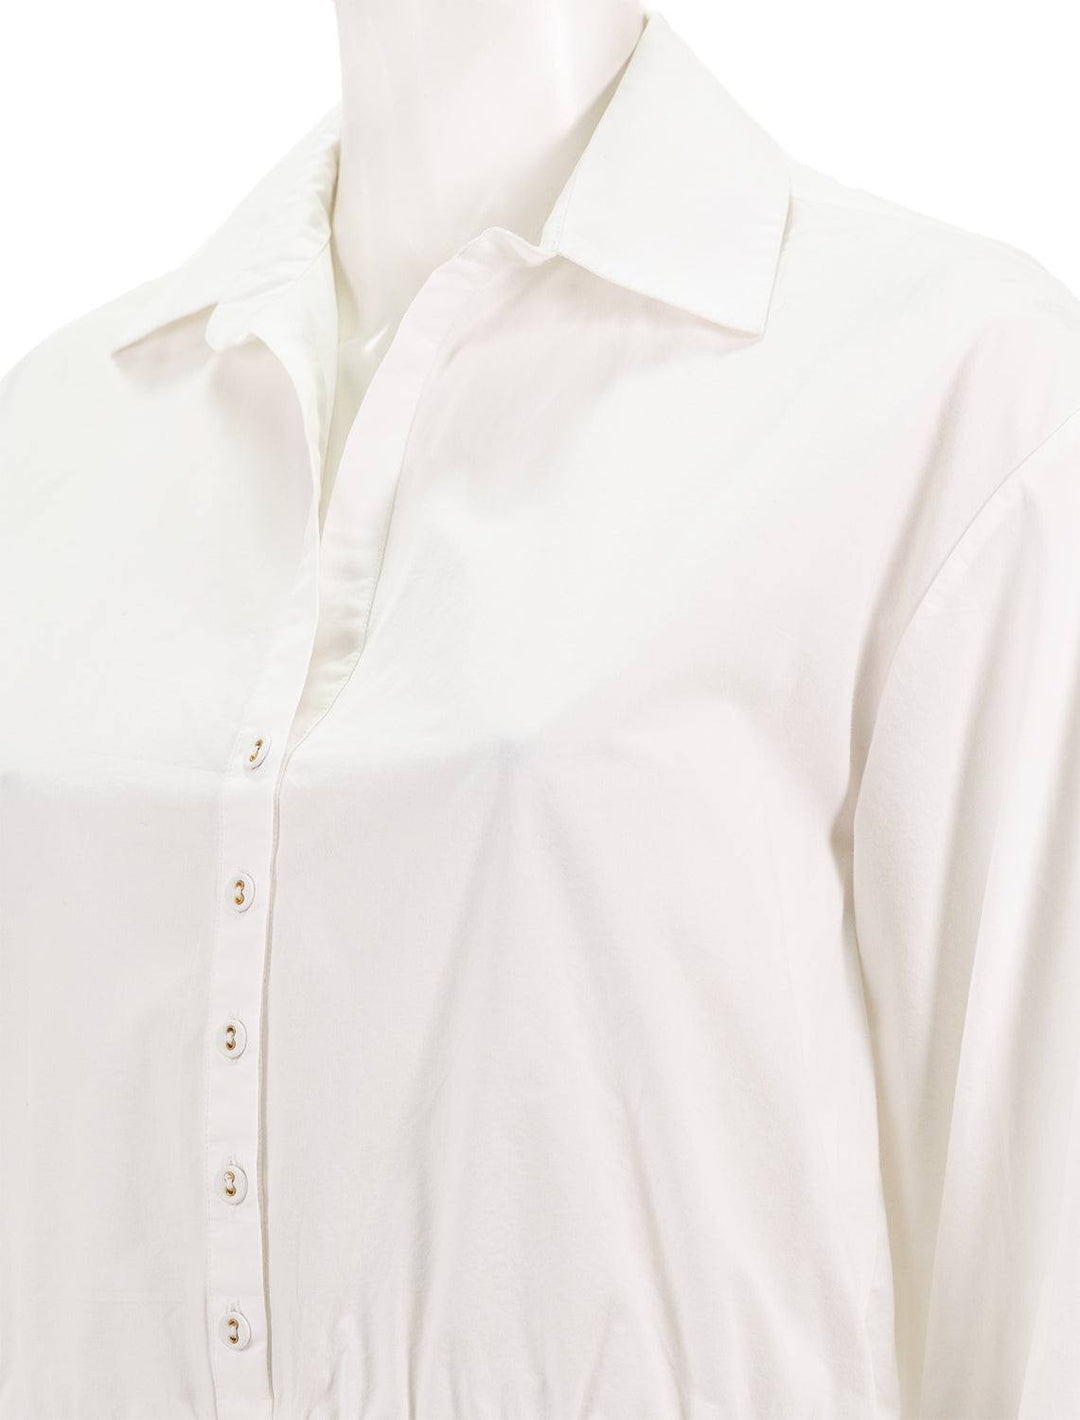 Close-up view of Cara Cara's hutton top in white.